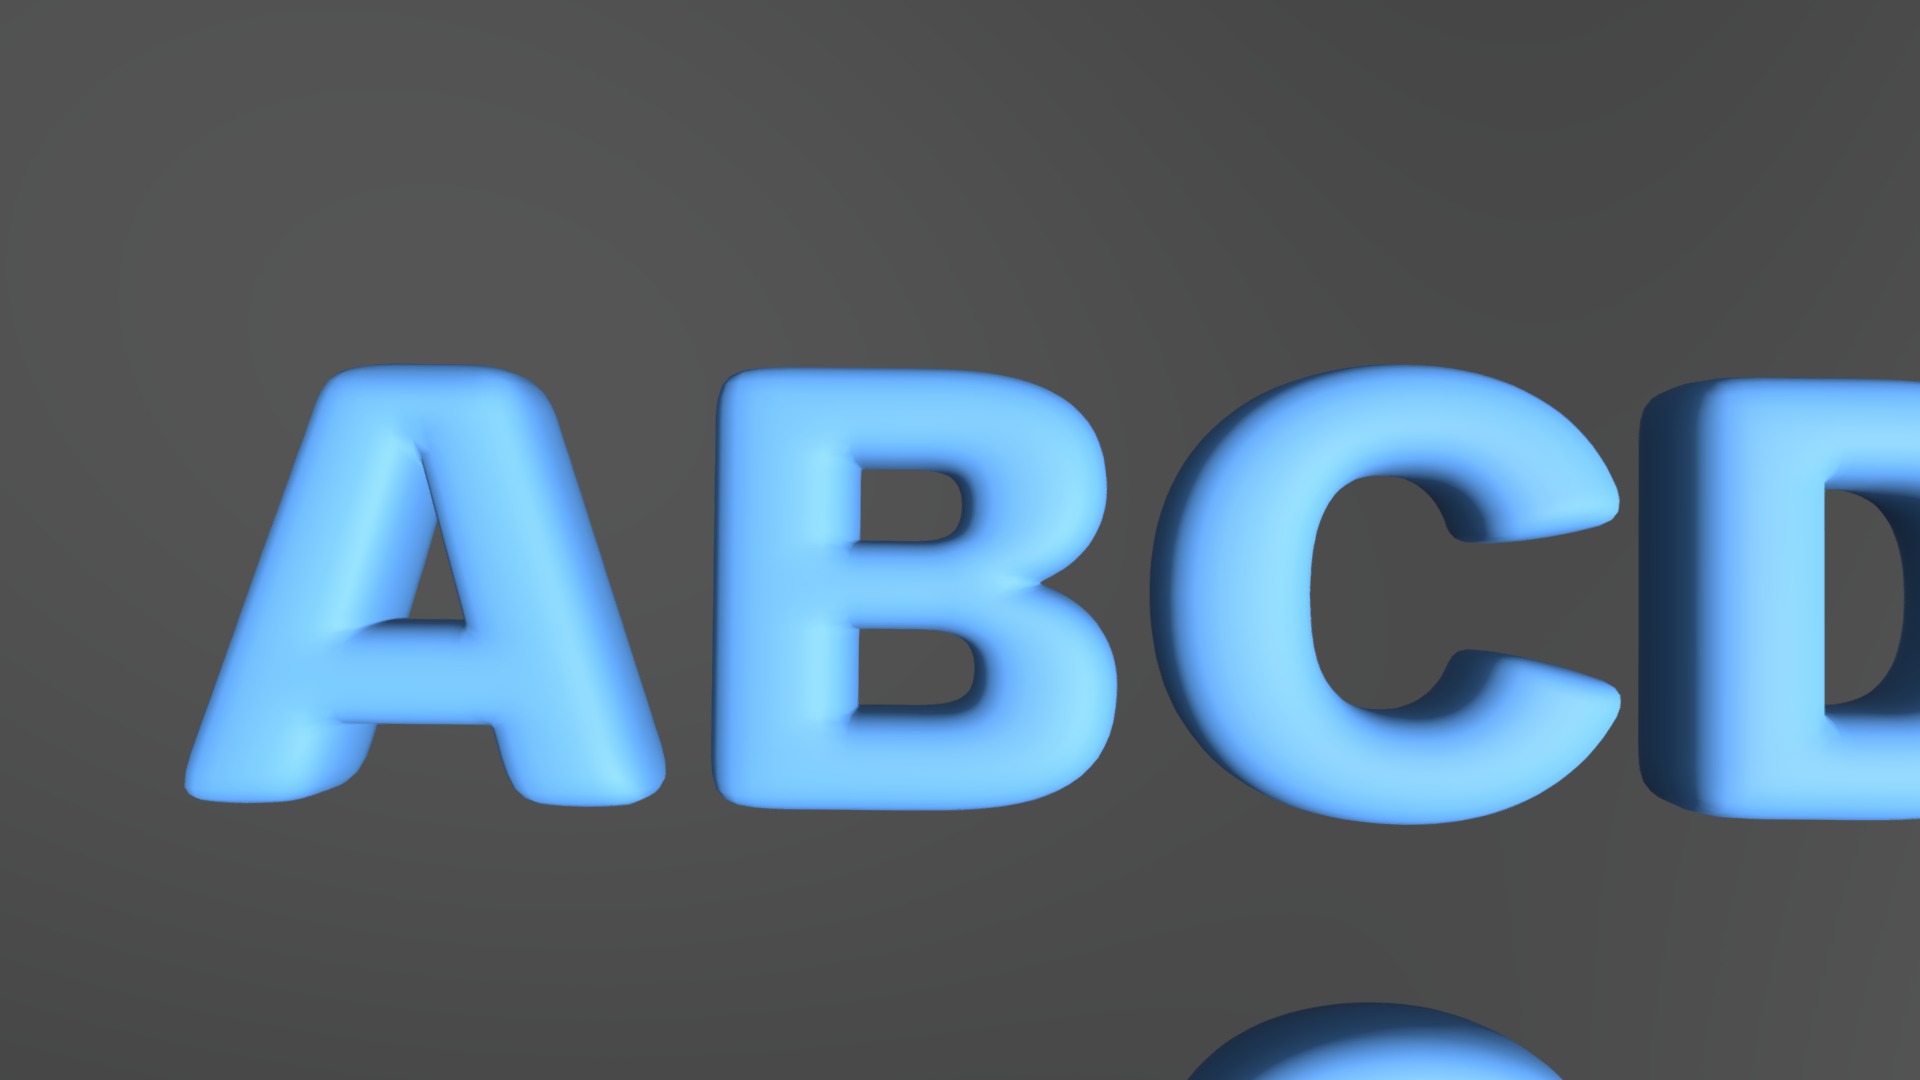 3D model HT Standard, 3D Font, Round Edges, 76 Characters - This is a 3D model of the HT Standard, 3D Font, Round Edges, 76 Characters. The 3D model is about a group of blue and white circles.